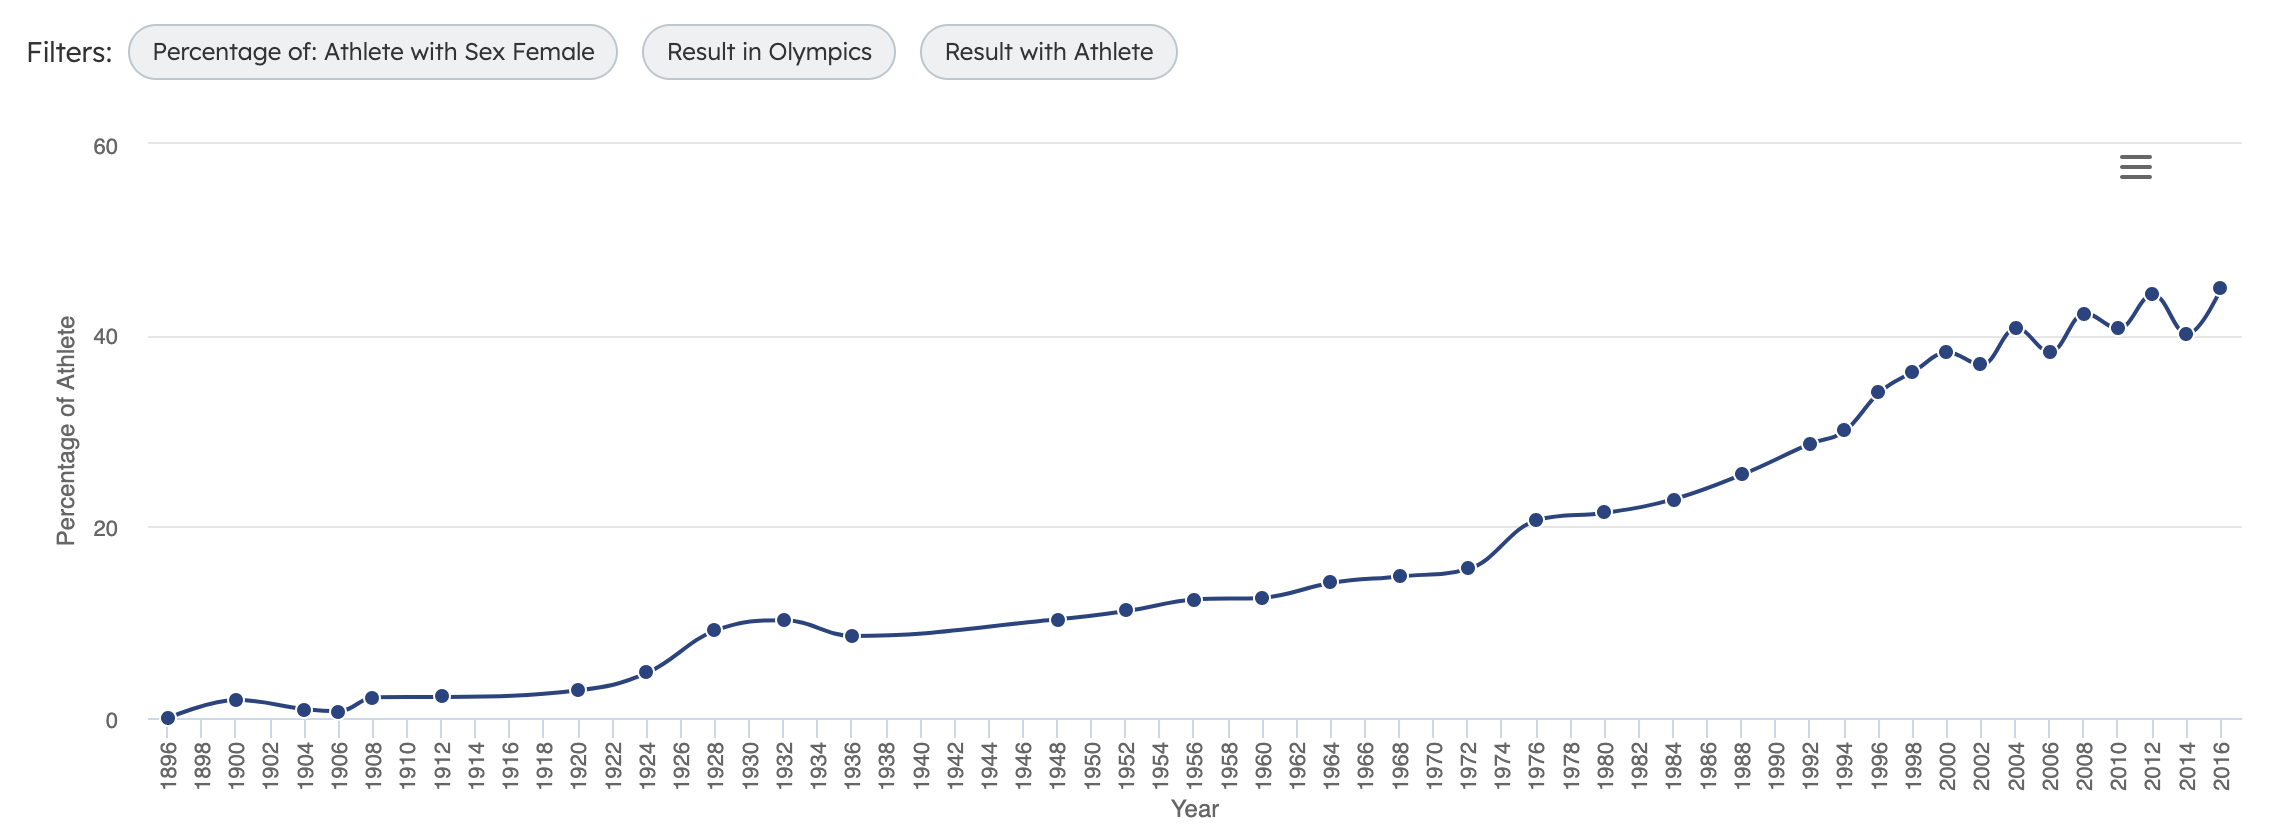 Percentage of Female Athletes at the Olympic Games by Year